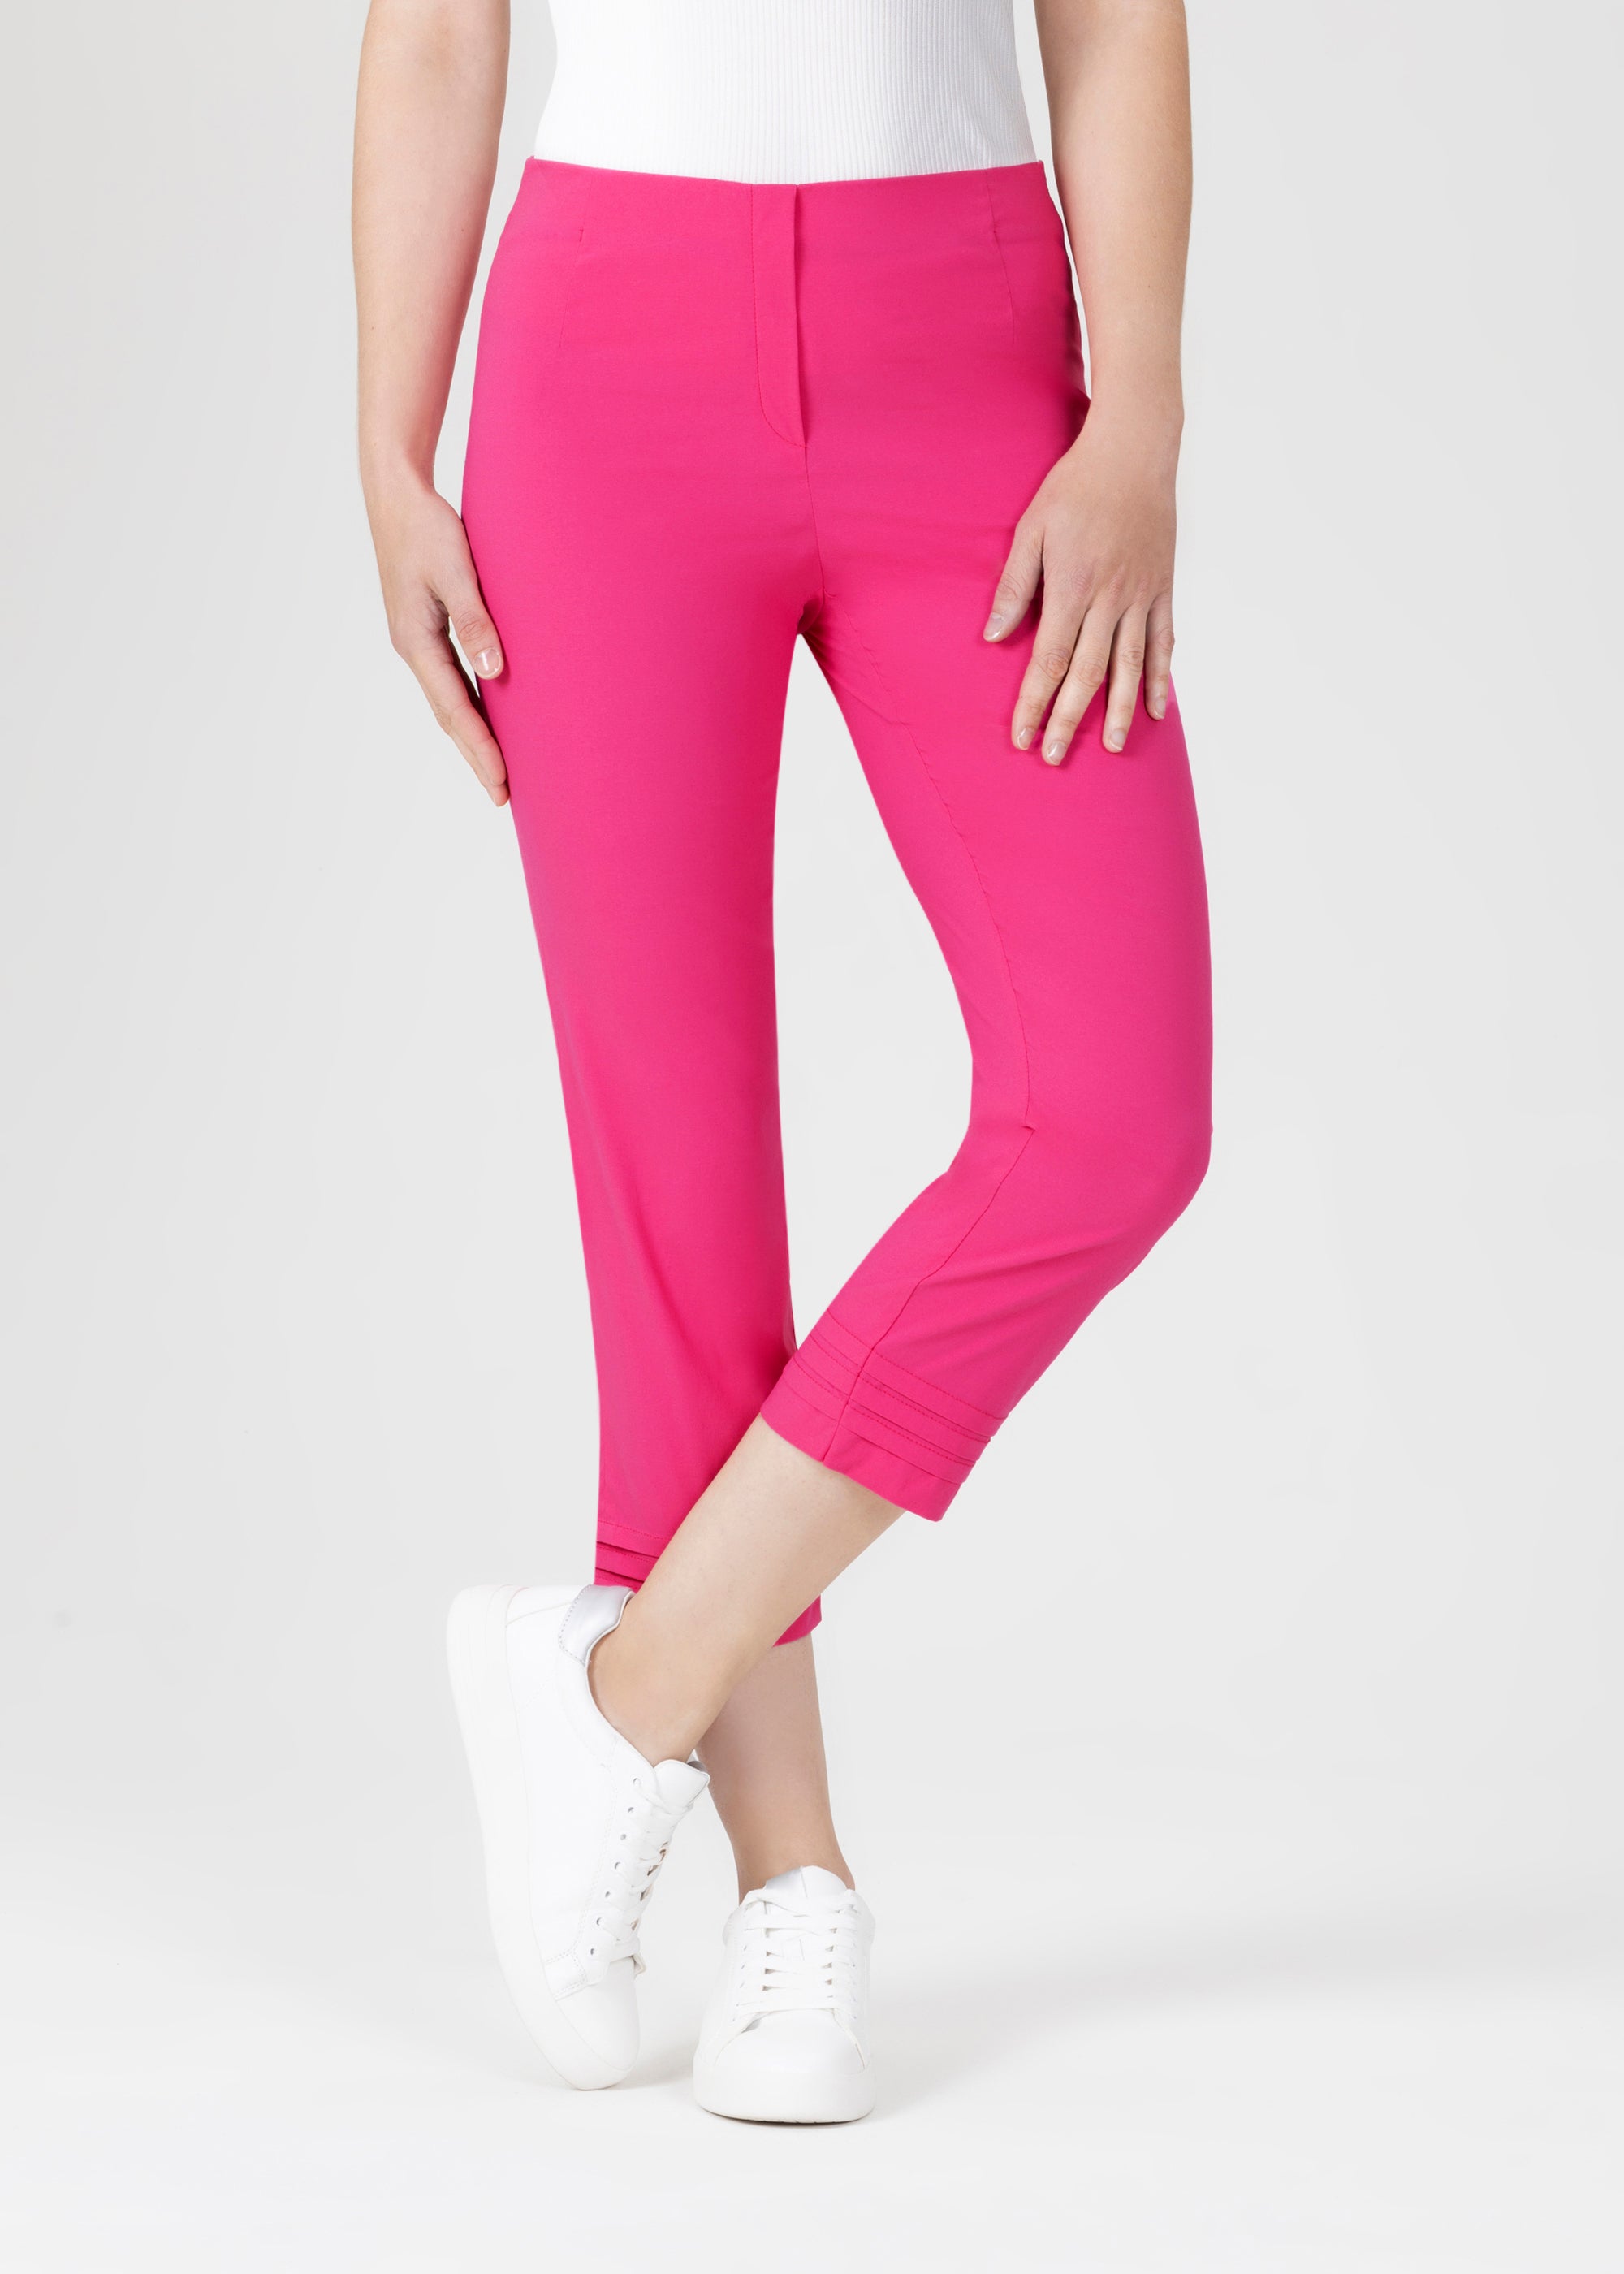 6/8-Hose Ina in Sommer Bengaline – ONLINE SHOP | OFFICIAL in pink Stehmann-store.com